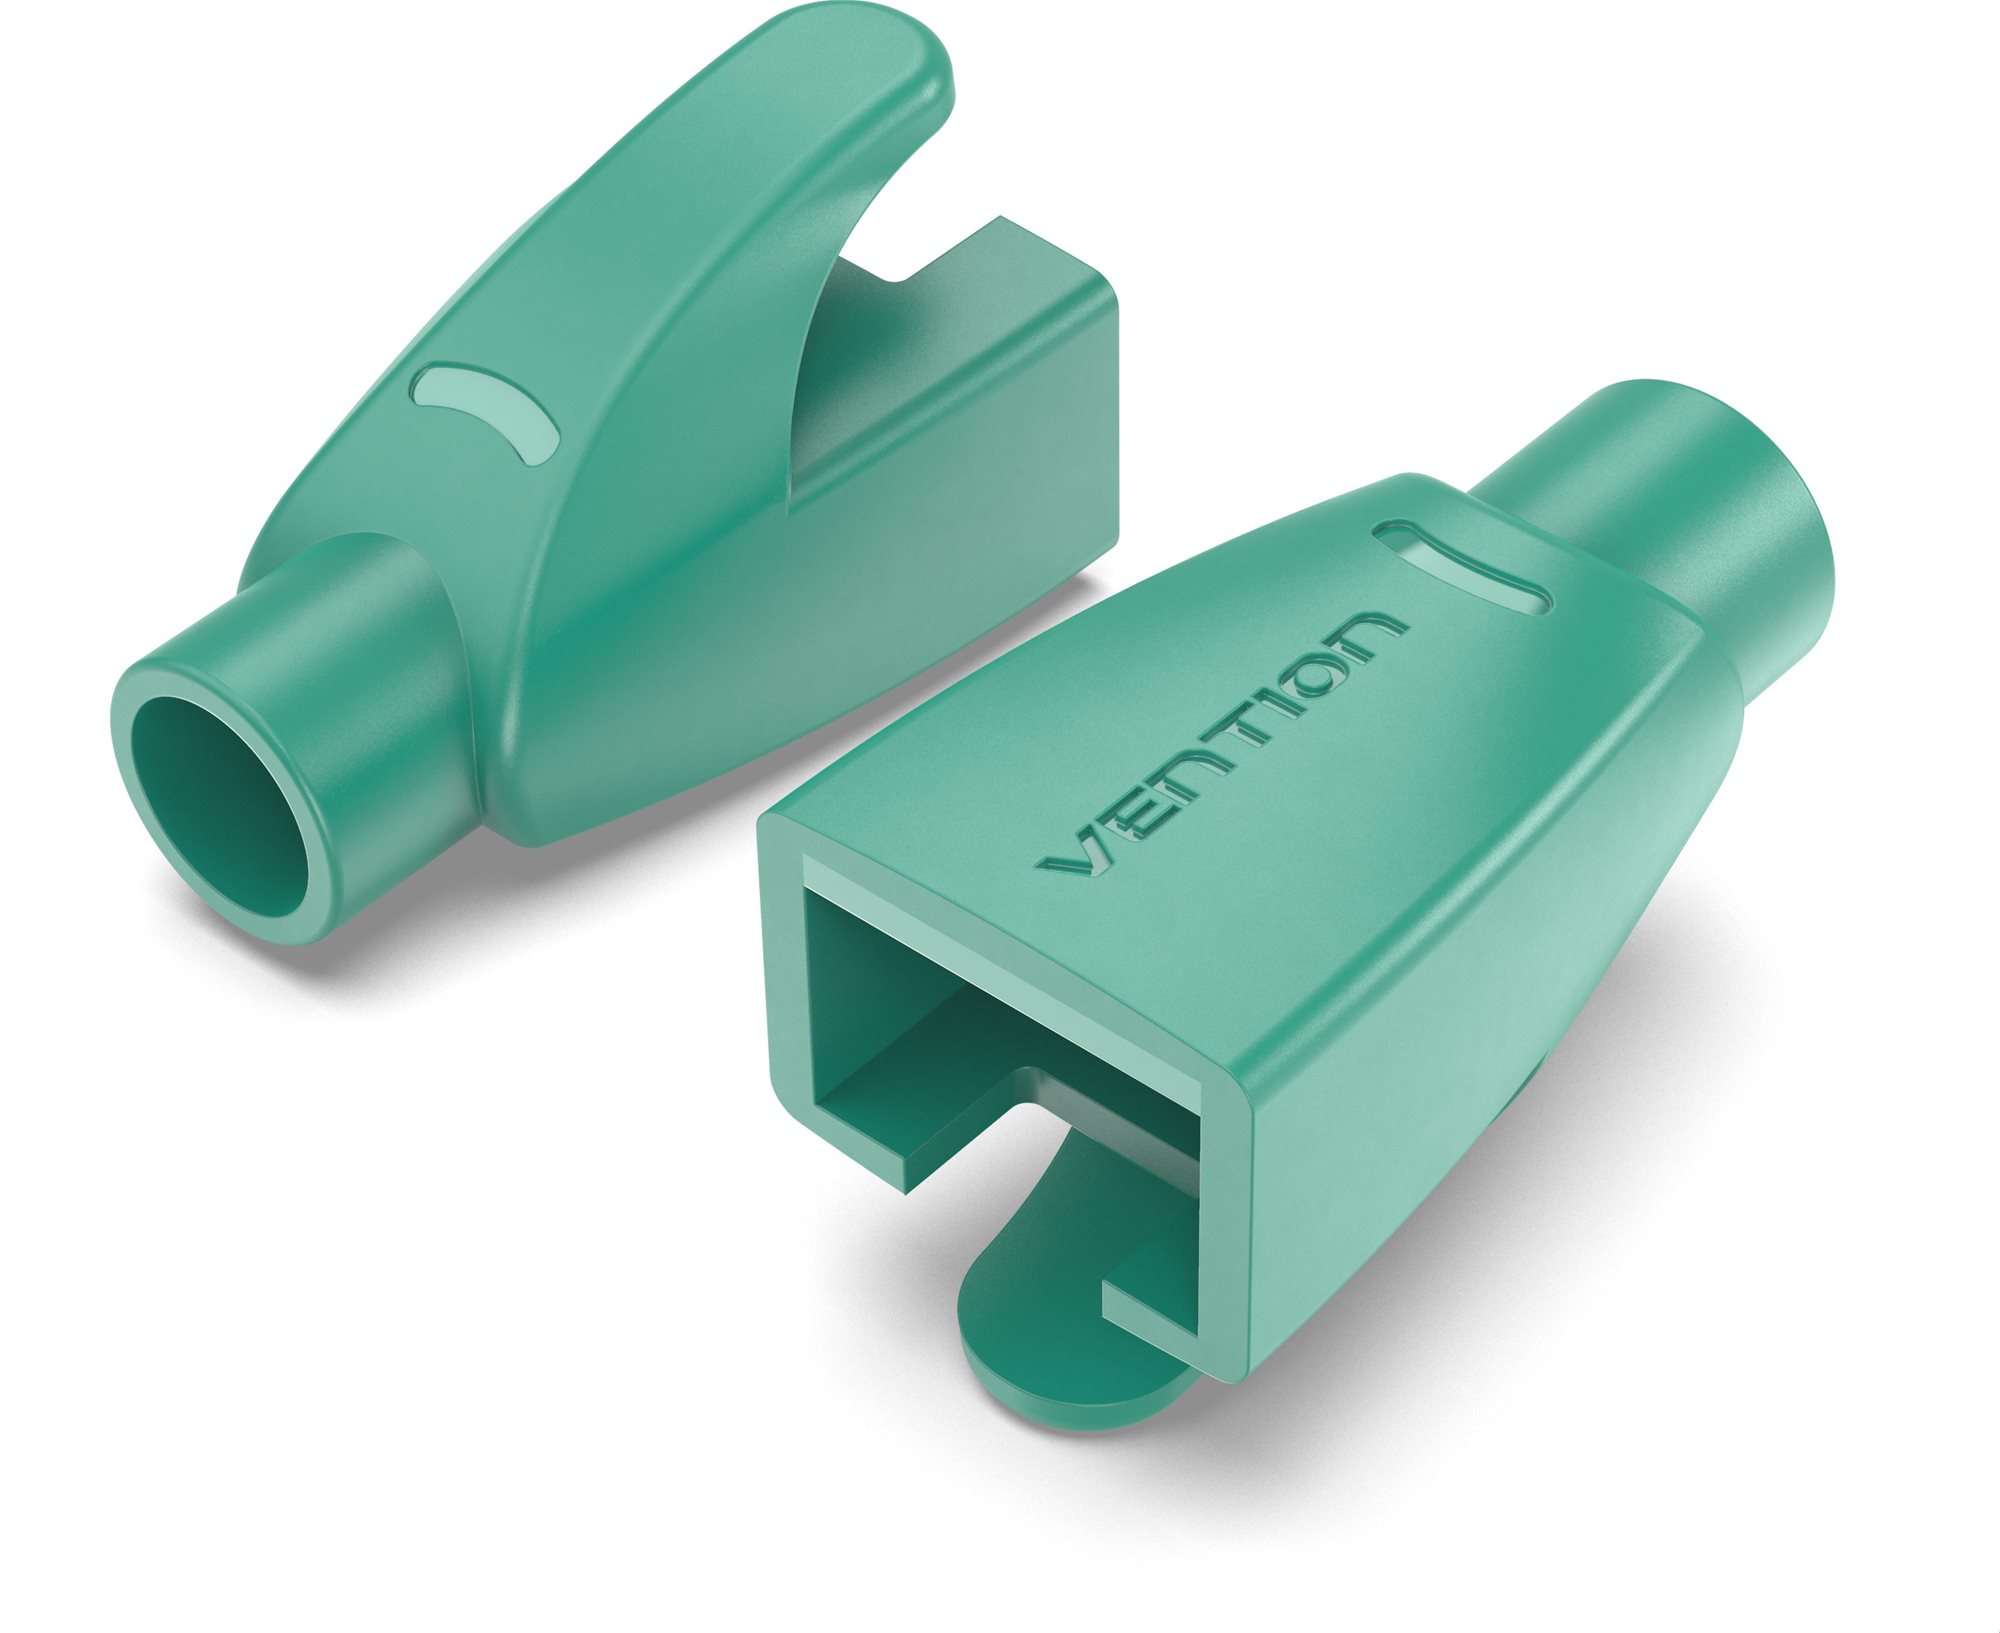 Vention RJ45 Strain Relief Boots Green PVC Type 100 Pack